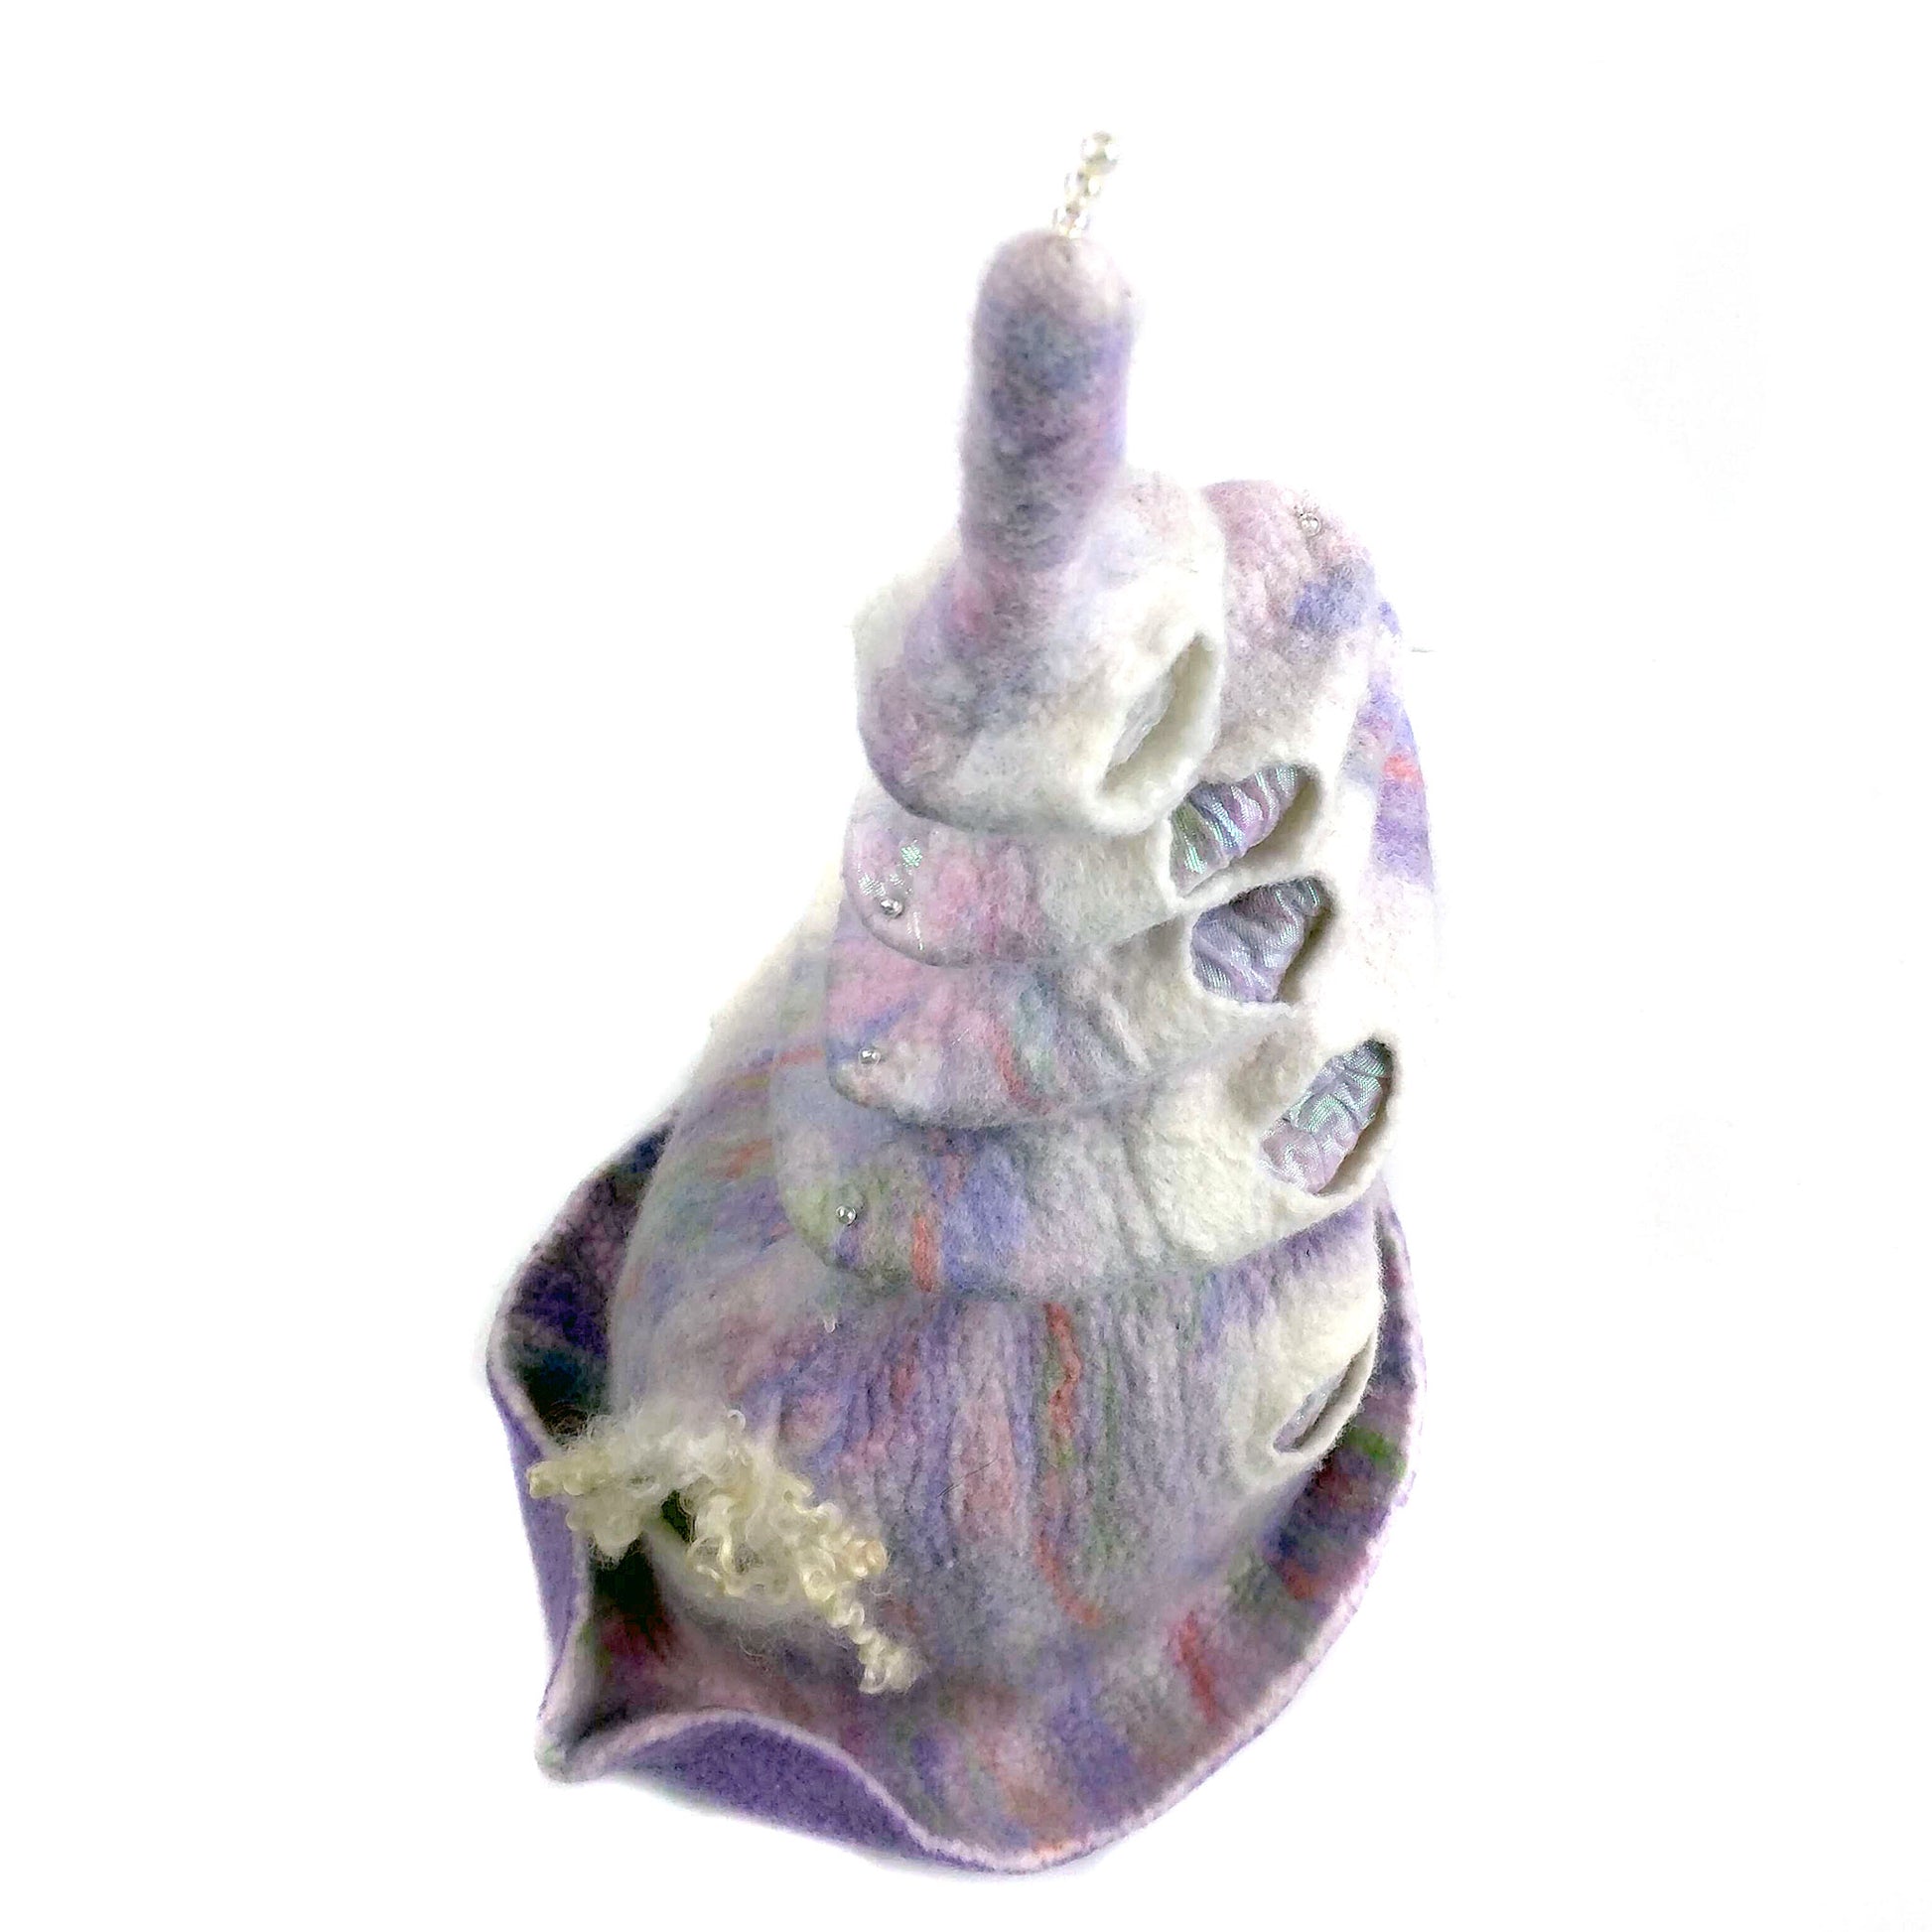 Pale Purple, Pastel Colored, Felted Unicorn Hat - top view